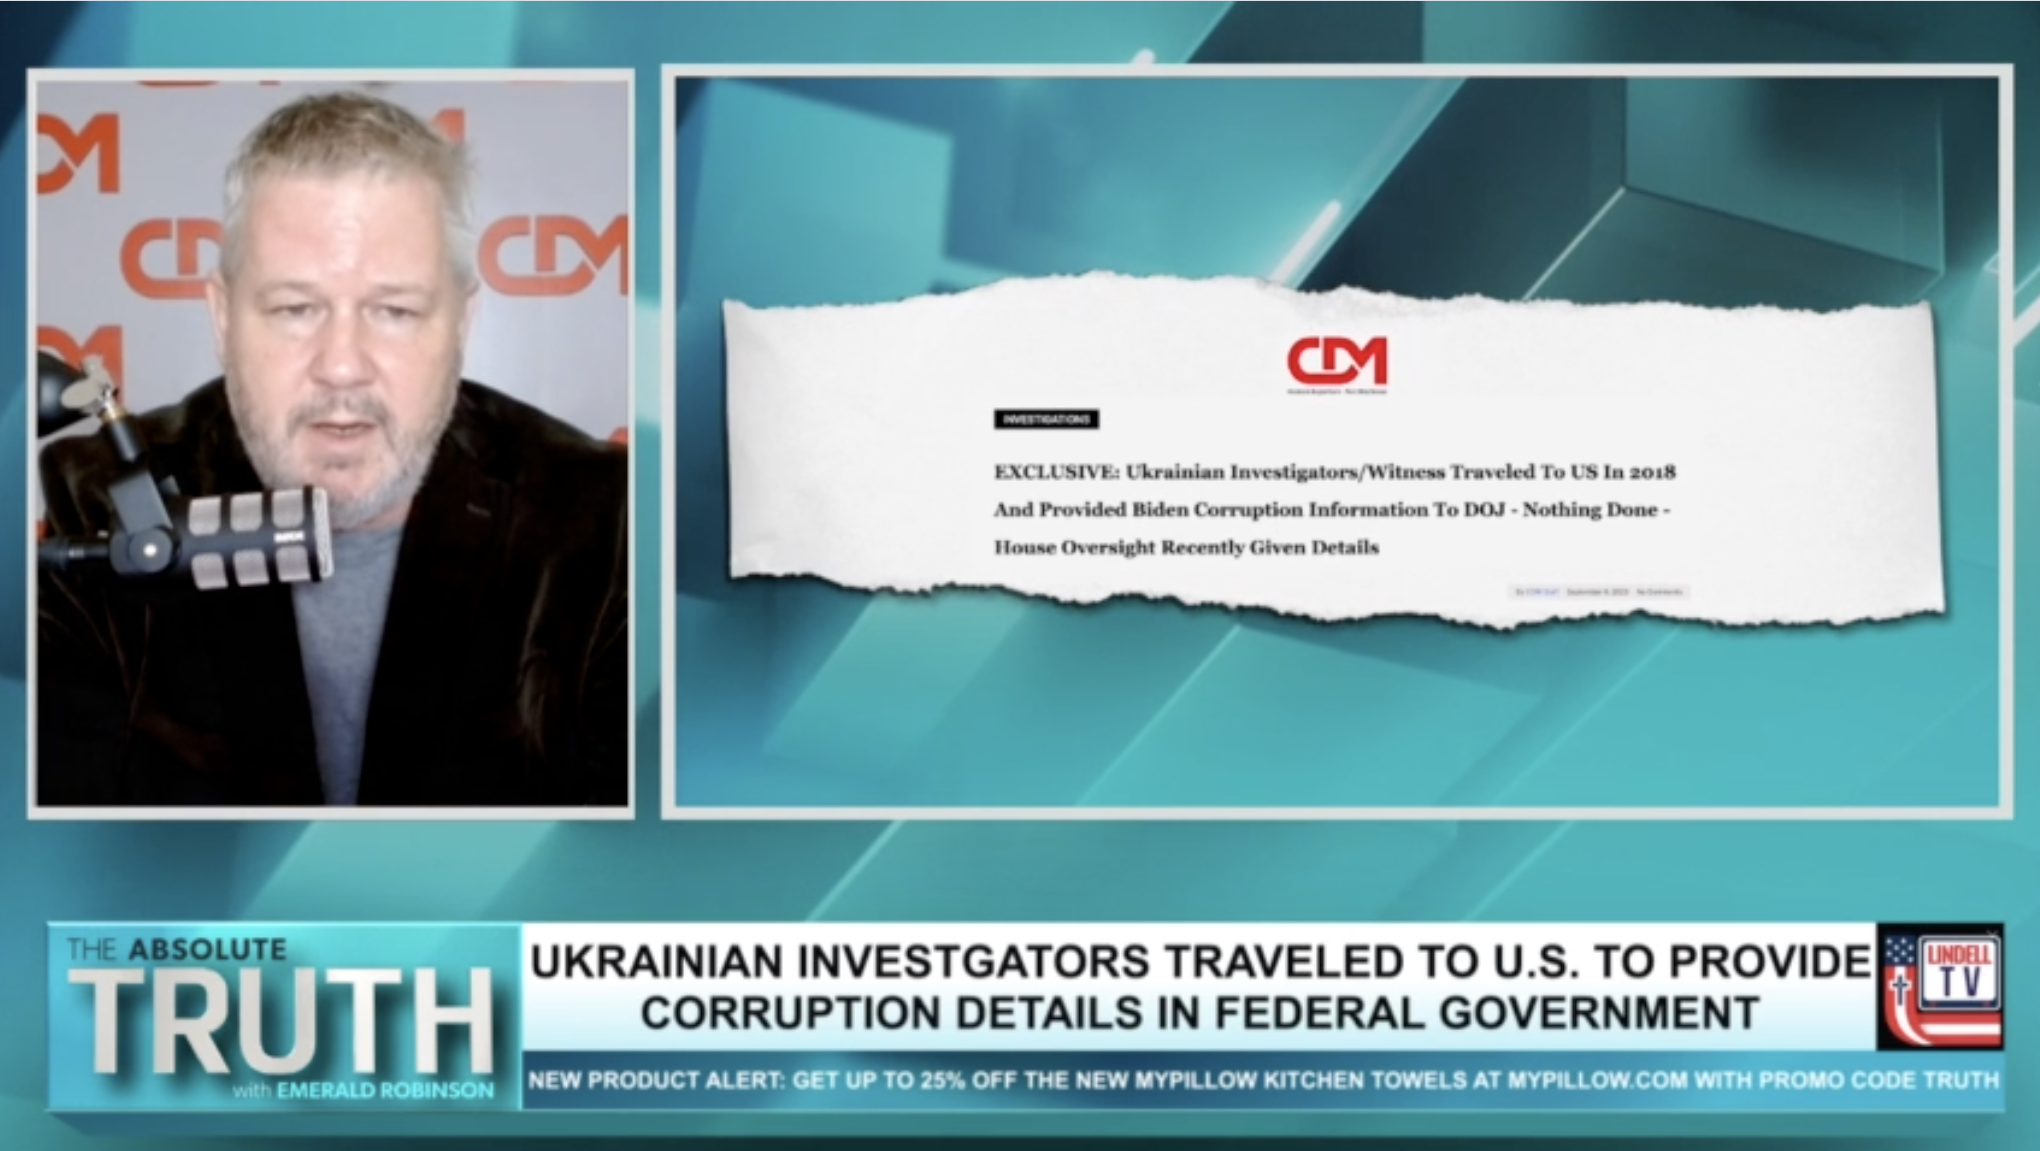 CDM Founder L Todd Wood Appears With Emerald Robinson-UKRAINIAN INVESTIGATORS TRAVELED TO U.S. TO PROVIDE CORRUPTION DETAILS IN FEDERAL GOVERNMENT